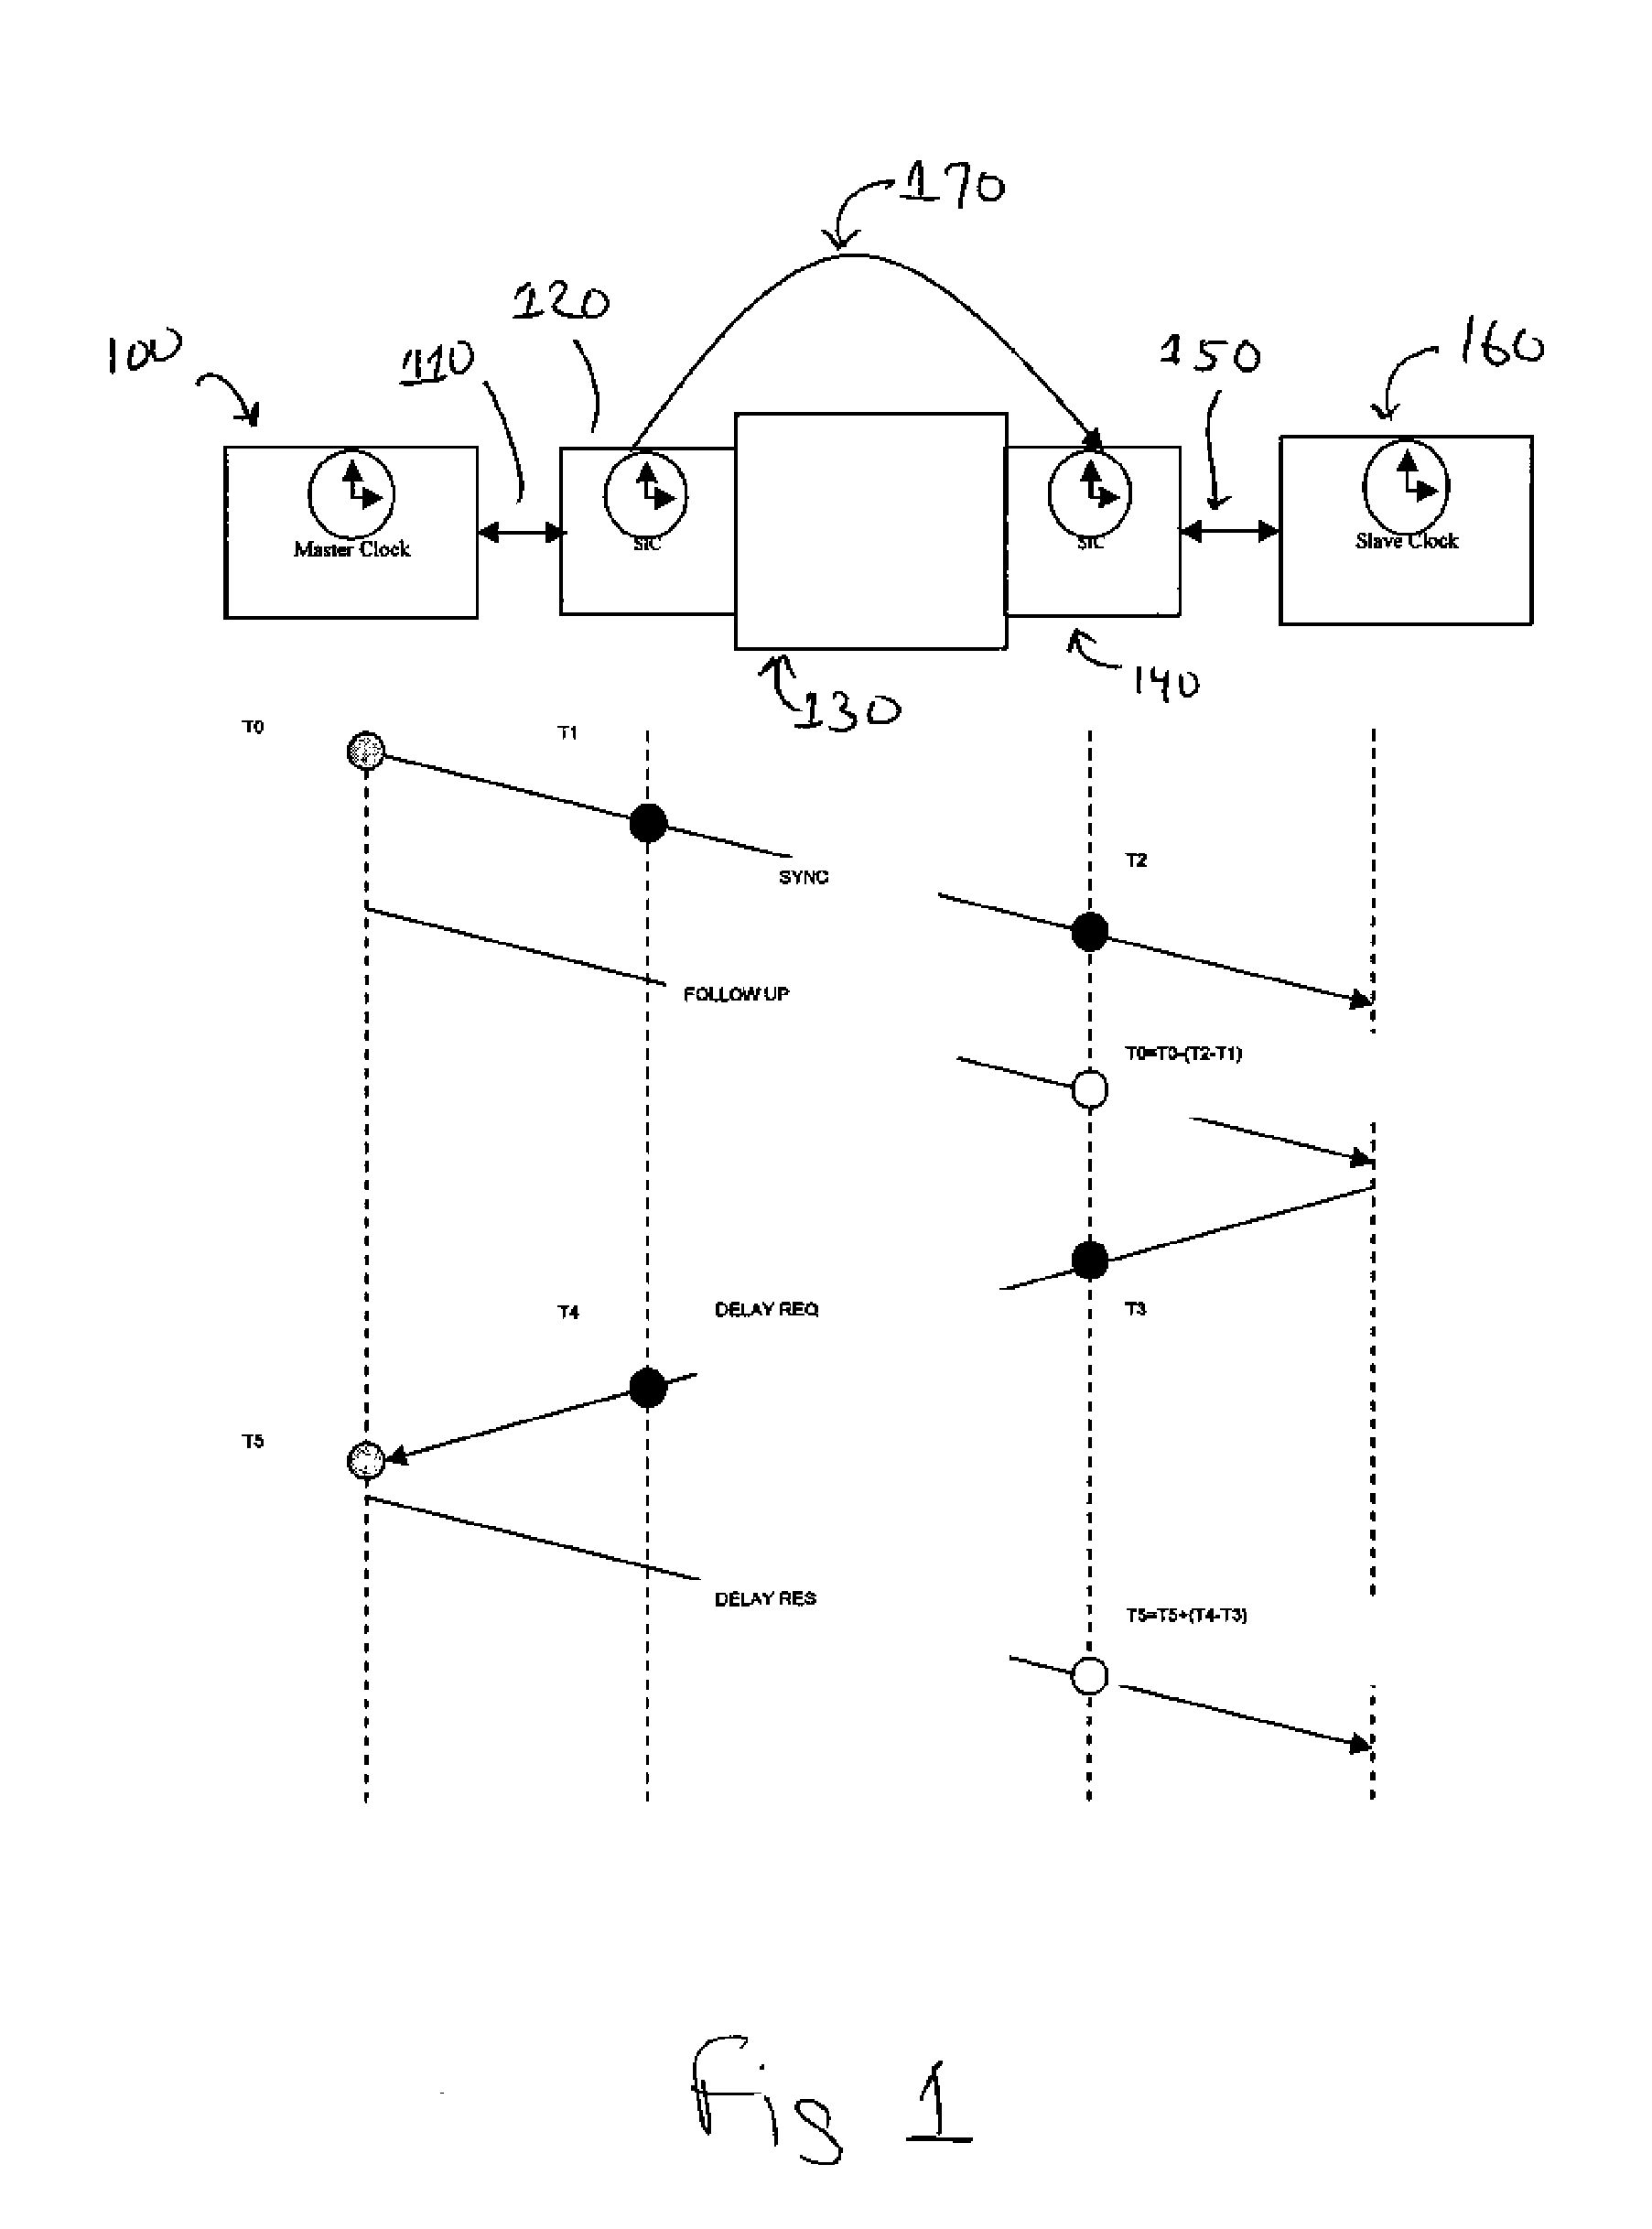 Mechanism For Making Delay From Network Elements Transparent To IEEE 1588 Protocols